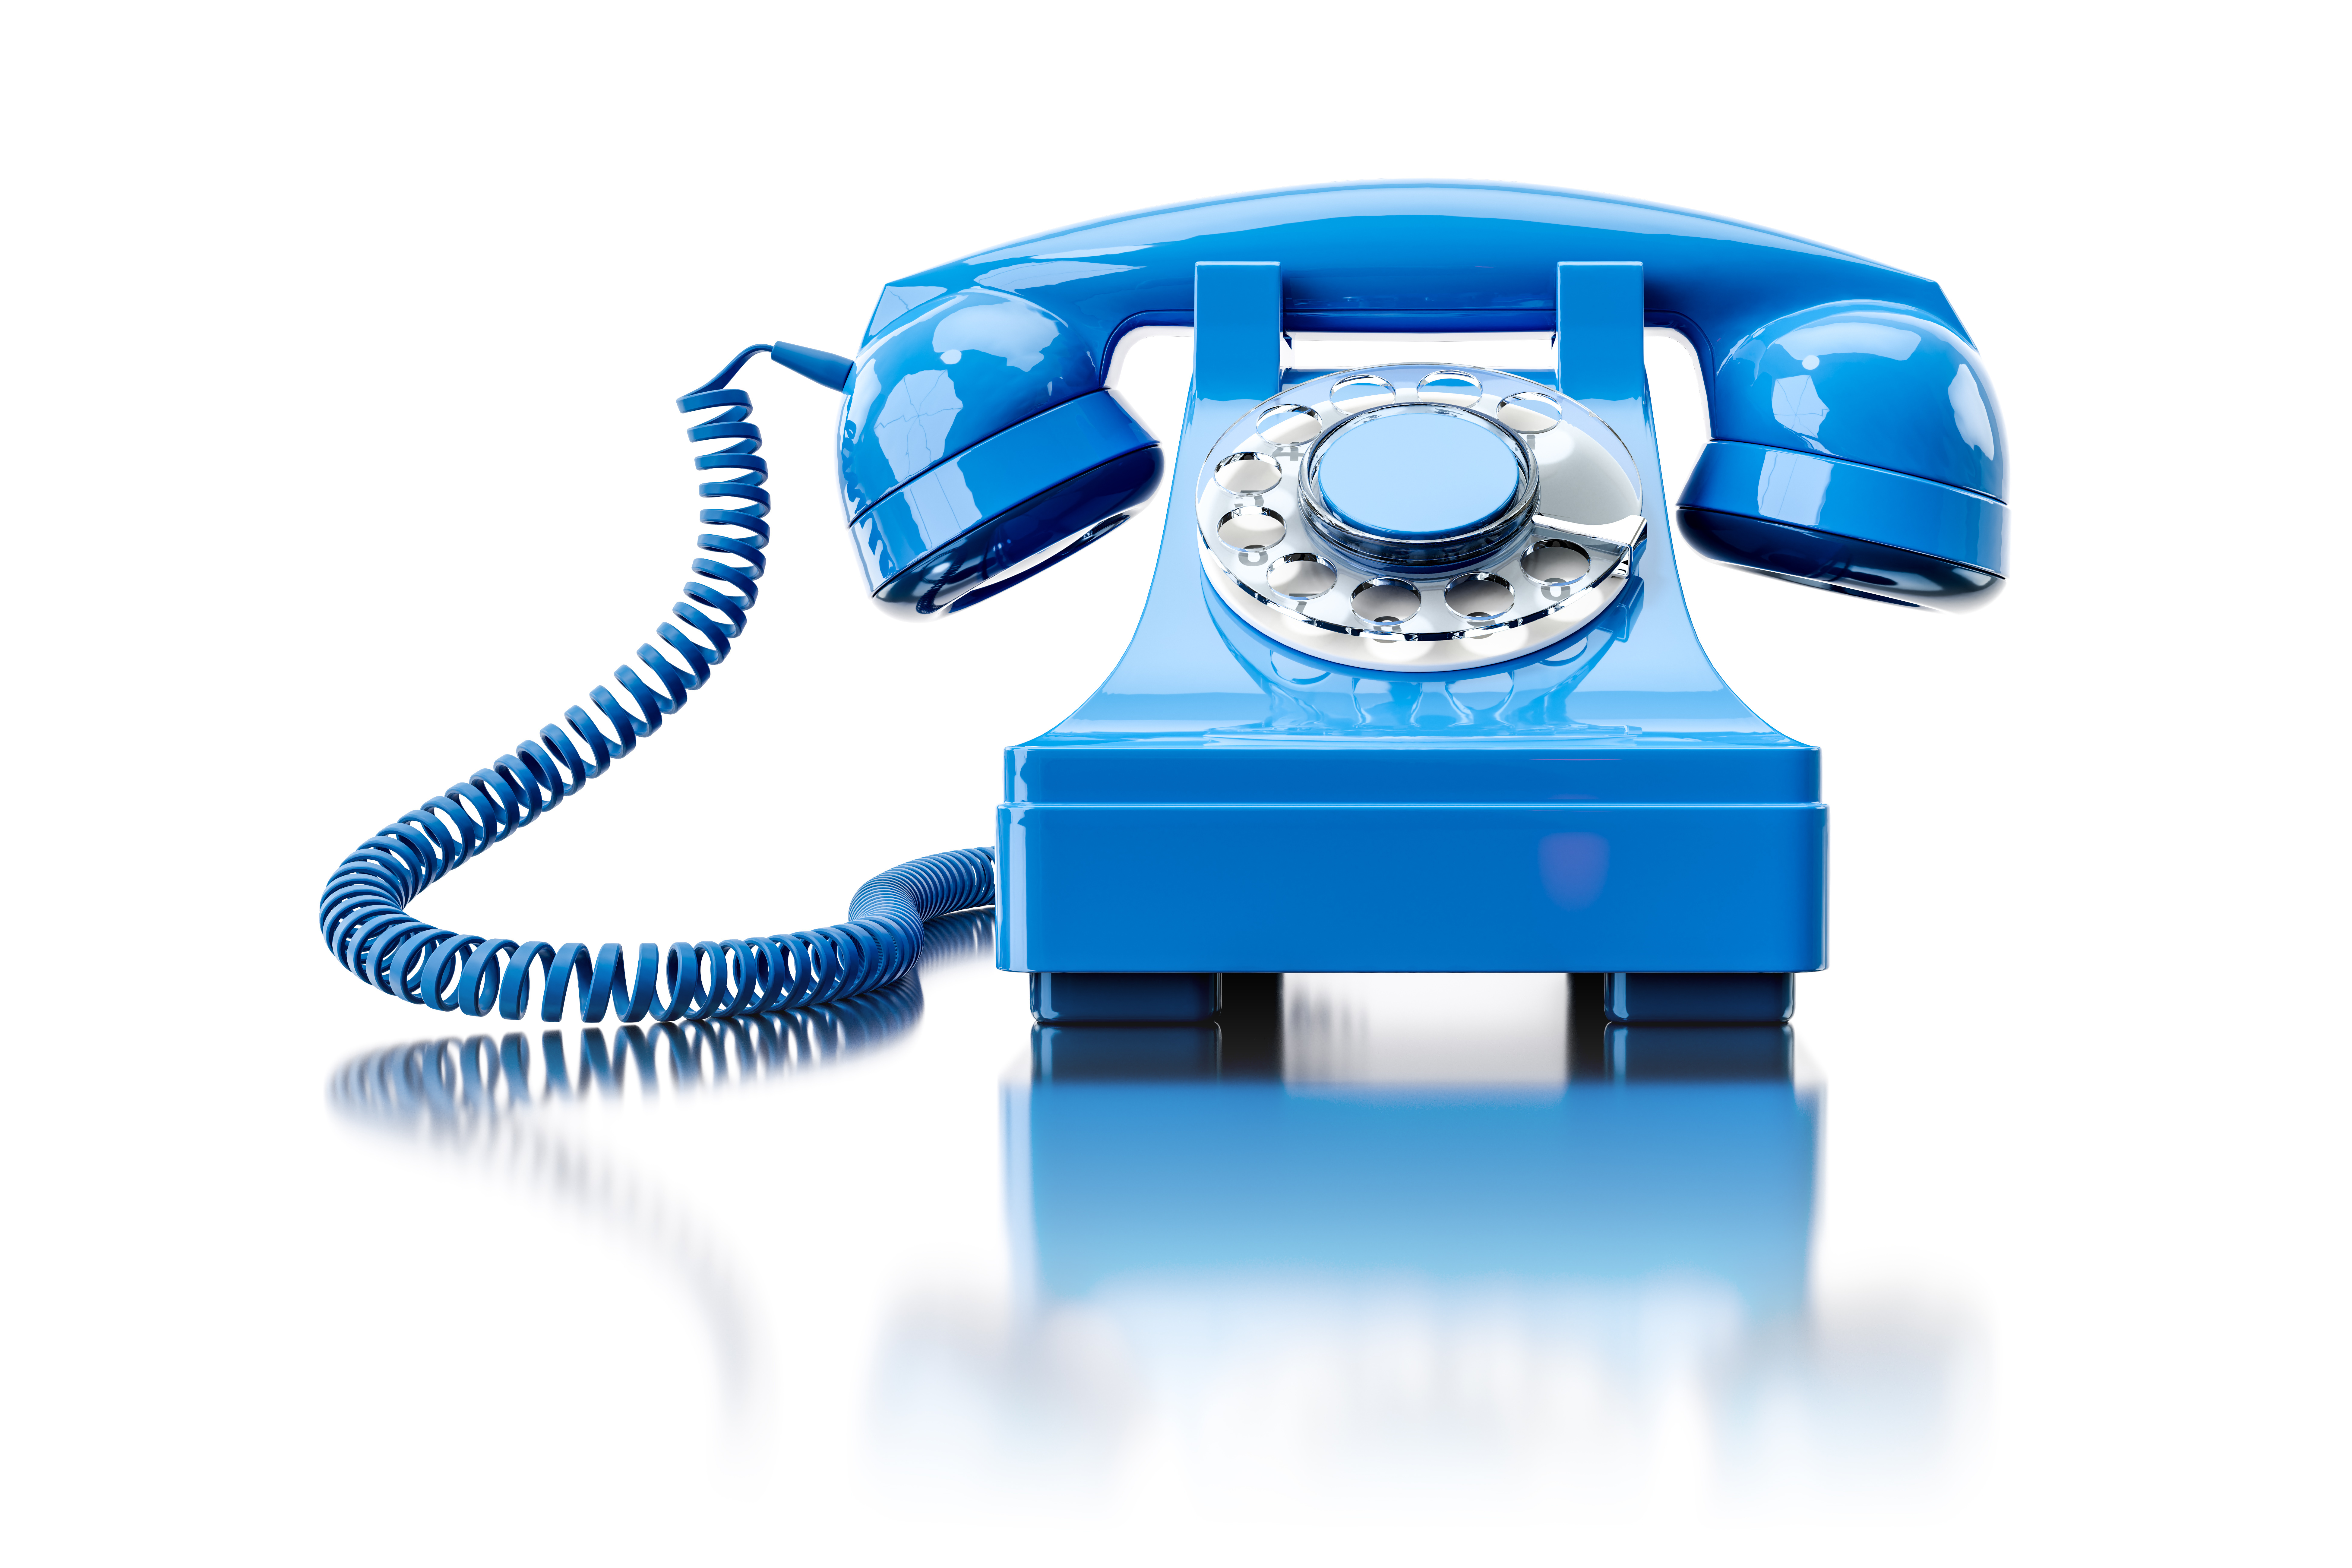 3d illustration of an old turquoise dial-up phone